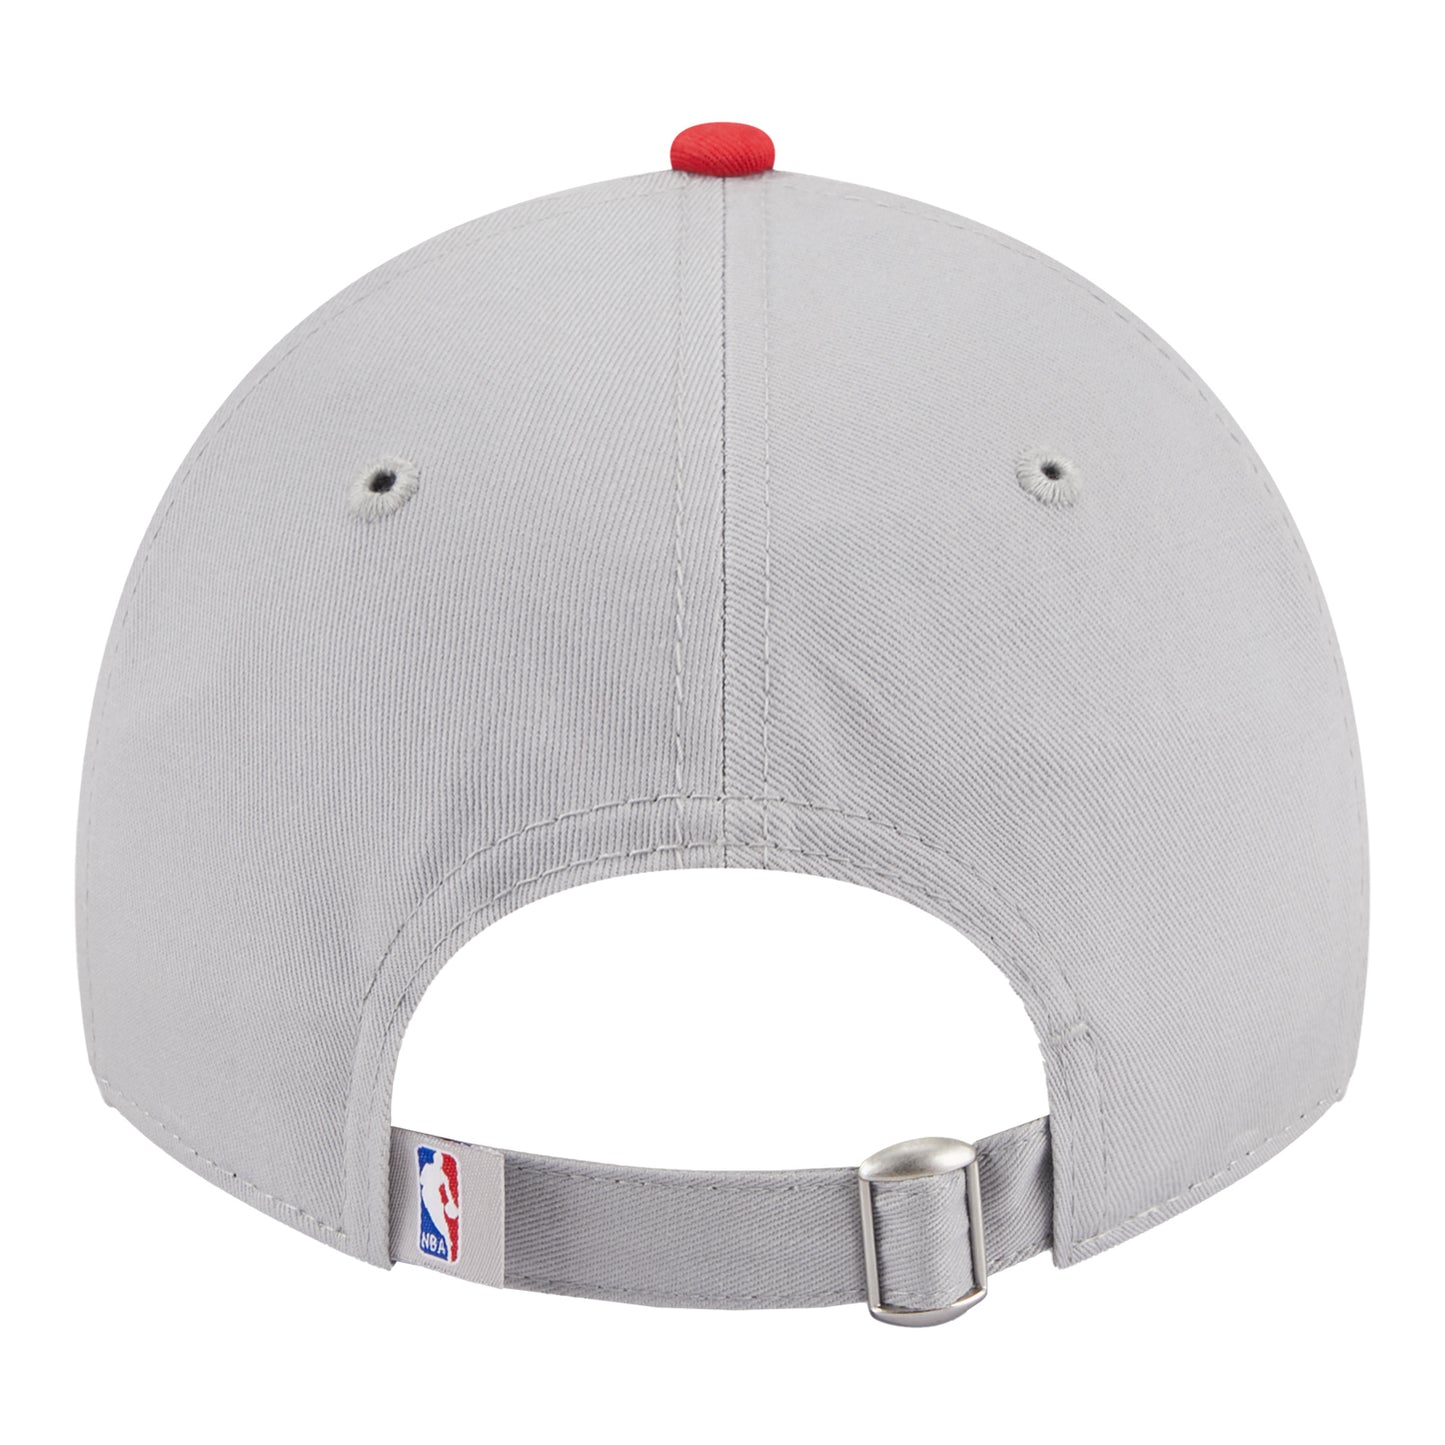 Chicago Bulls 23 Adjustable Tip Off Hat - grey and red - back view